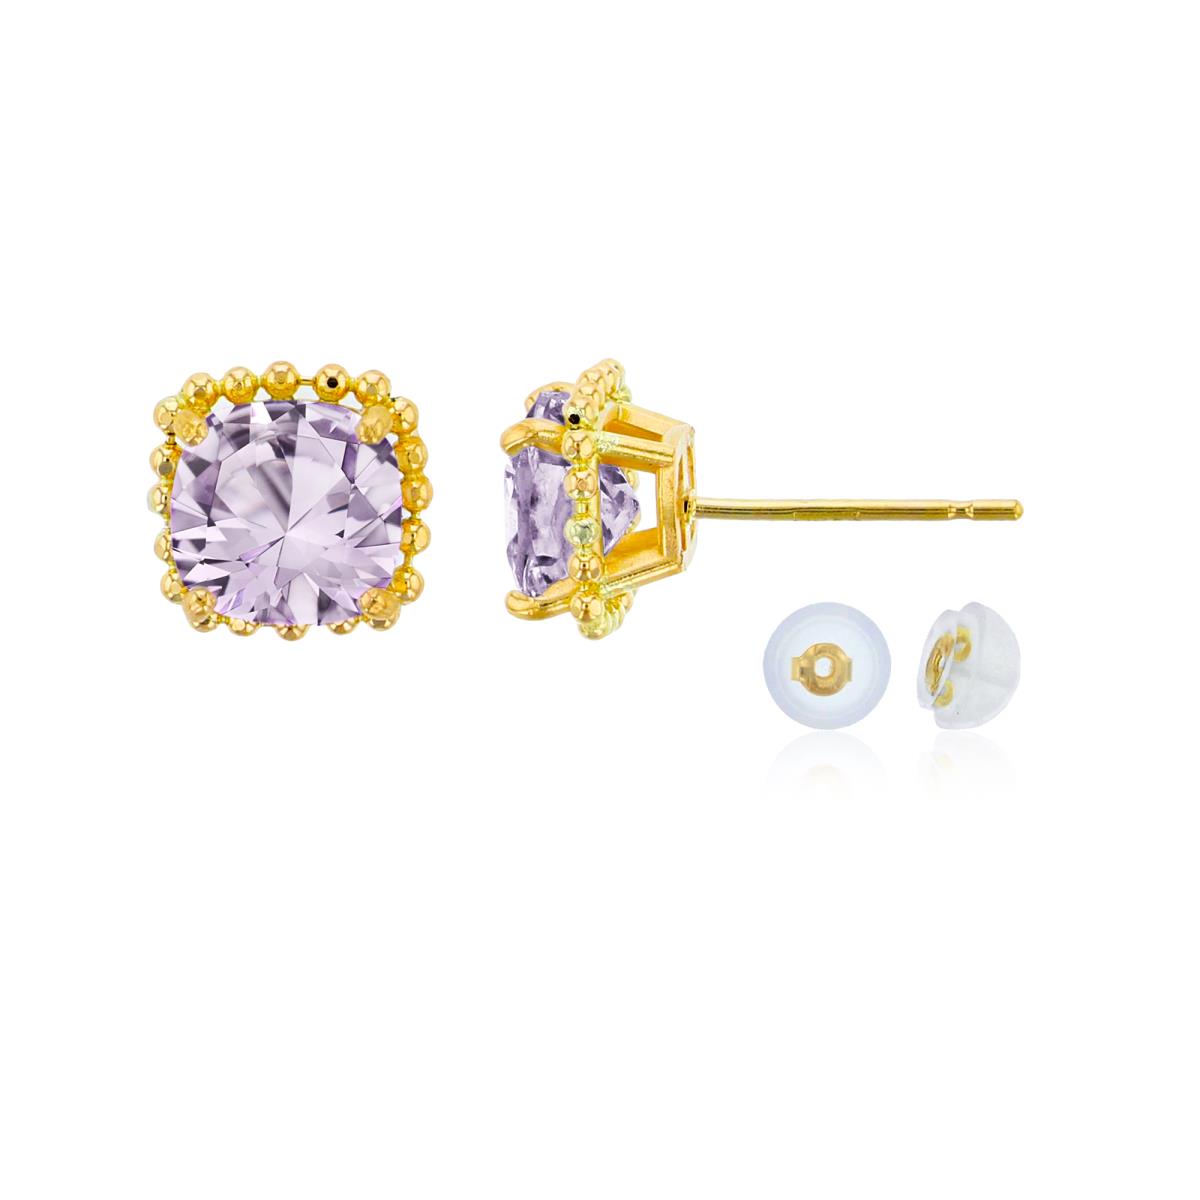 14K Yellow Gold 6x6mm Cushion Cut Rose De France Bead Frame Stud Earring with Silicone Back